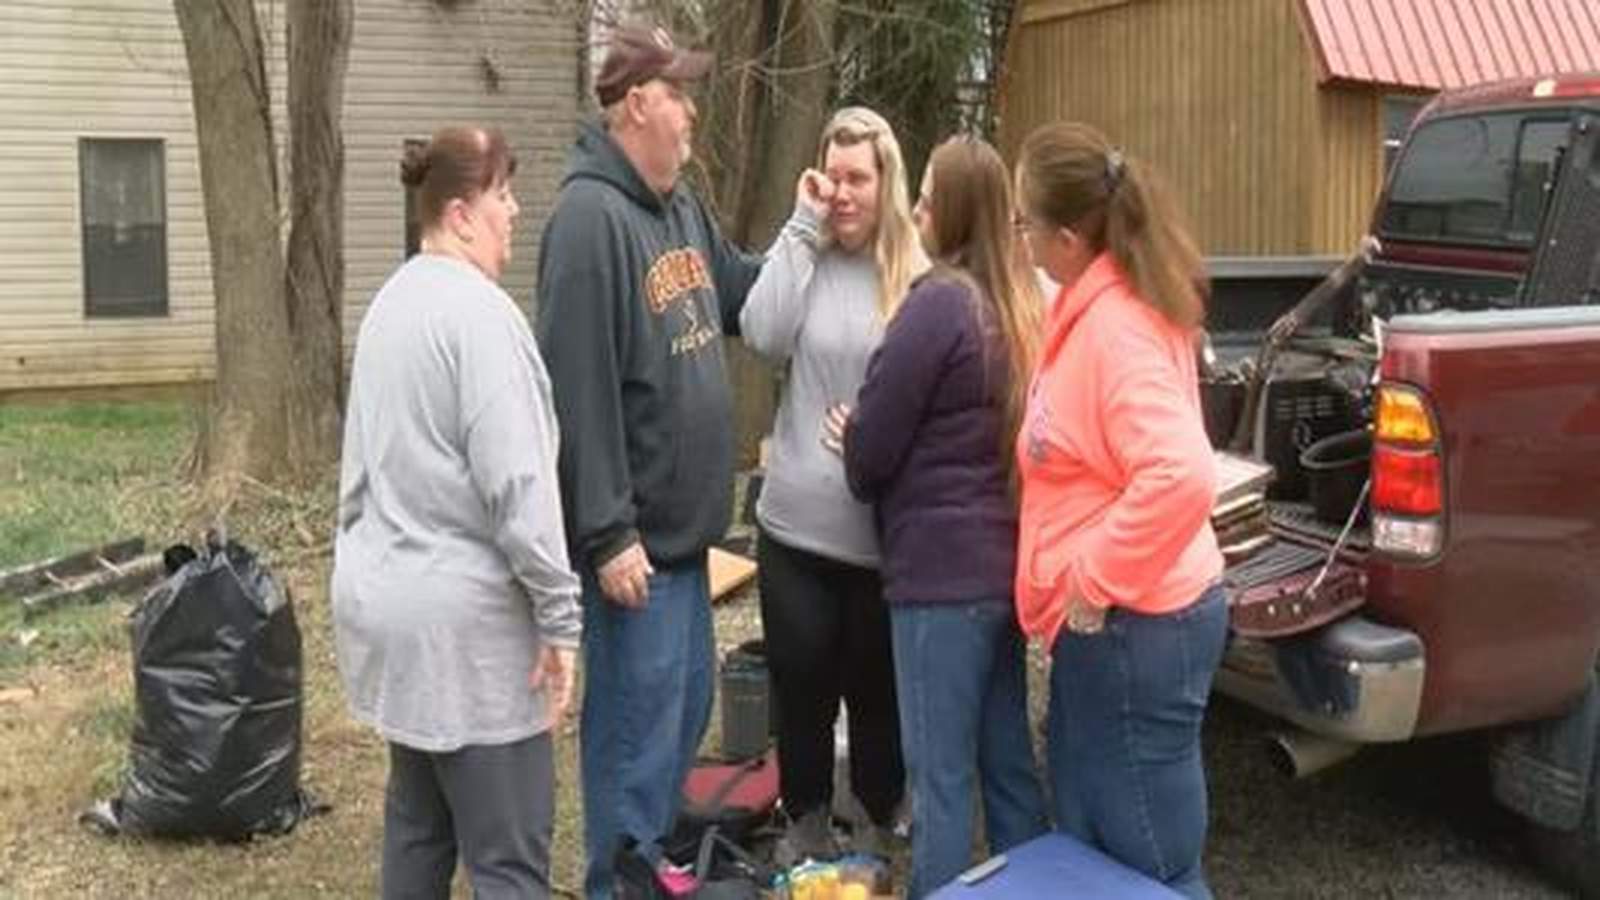 ‘It’s just overwhelming’: People step up to help family after tragic house fire